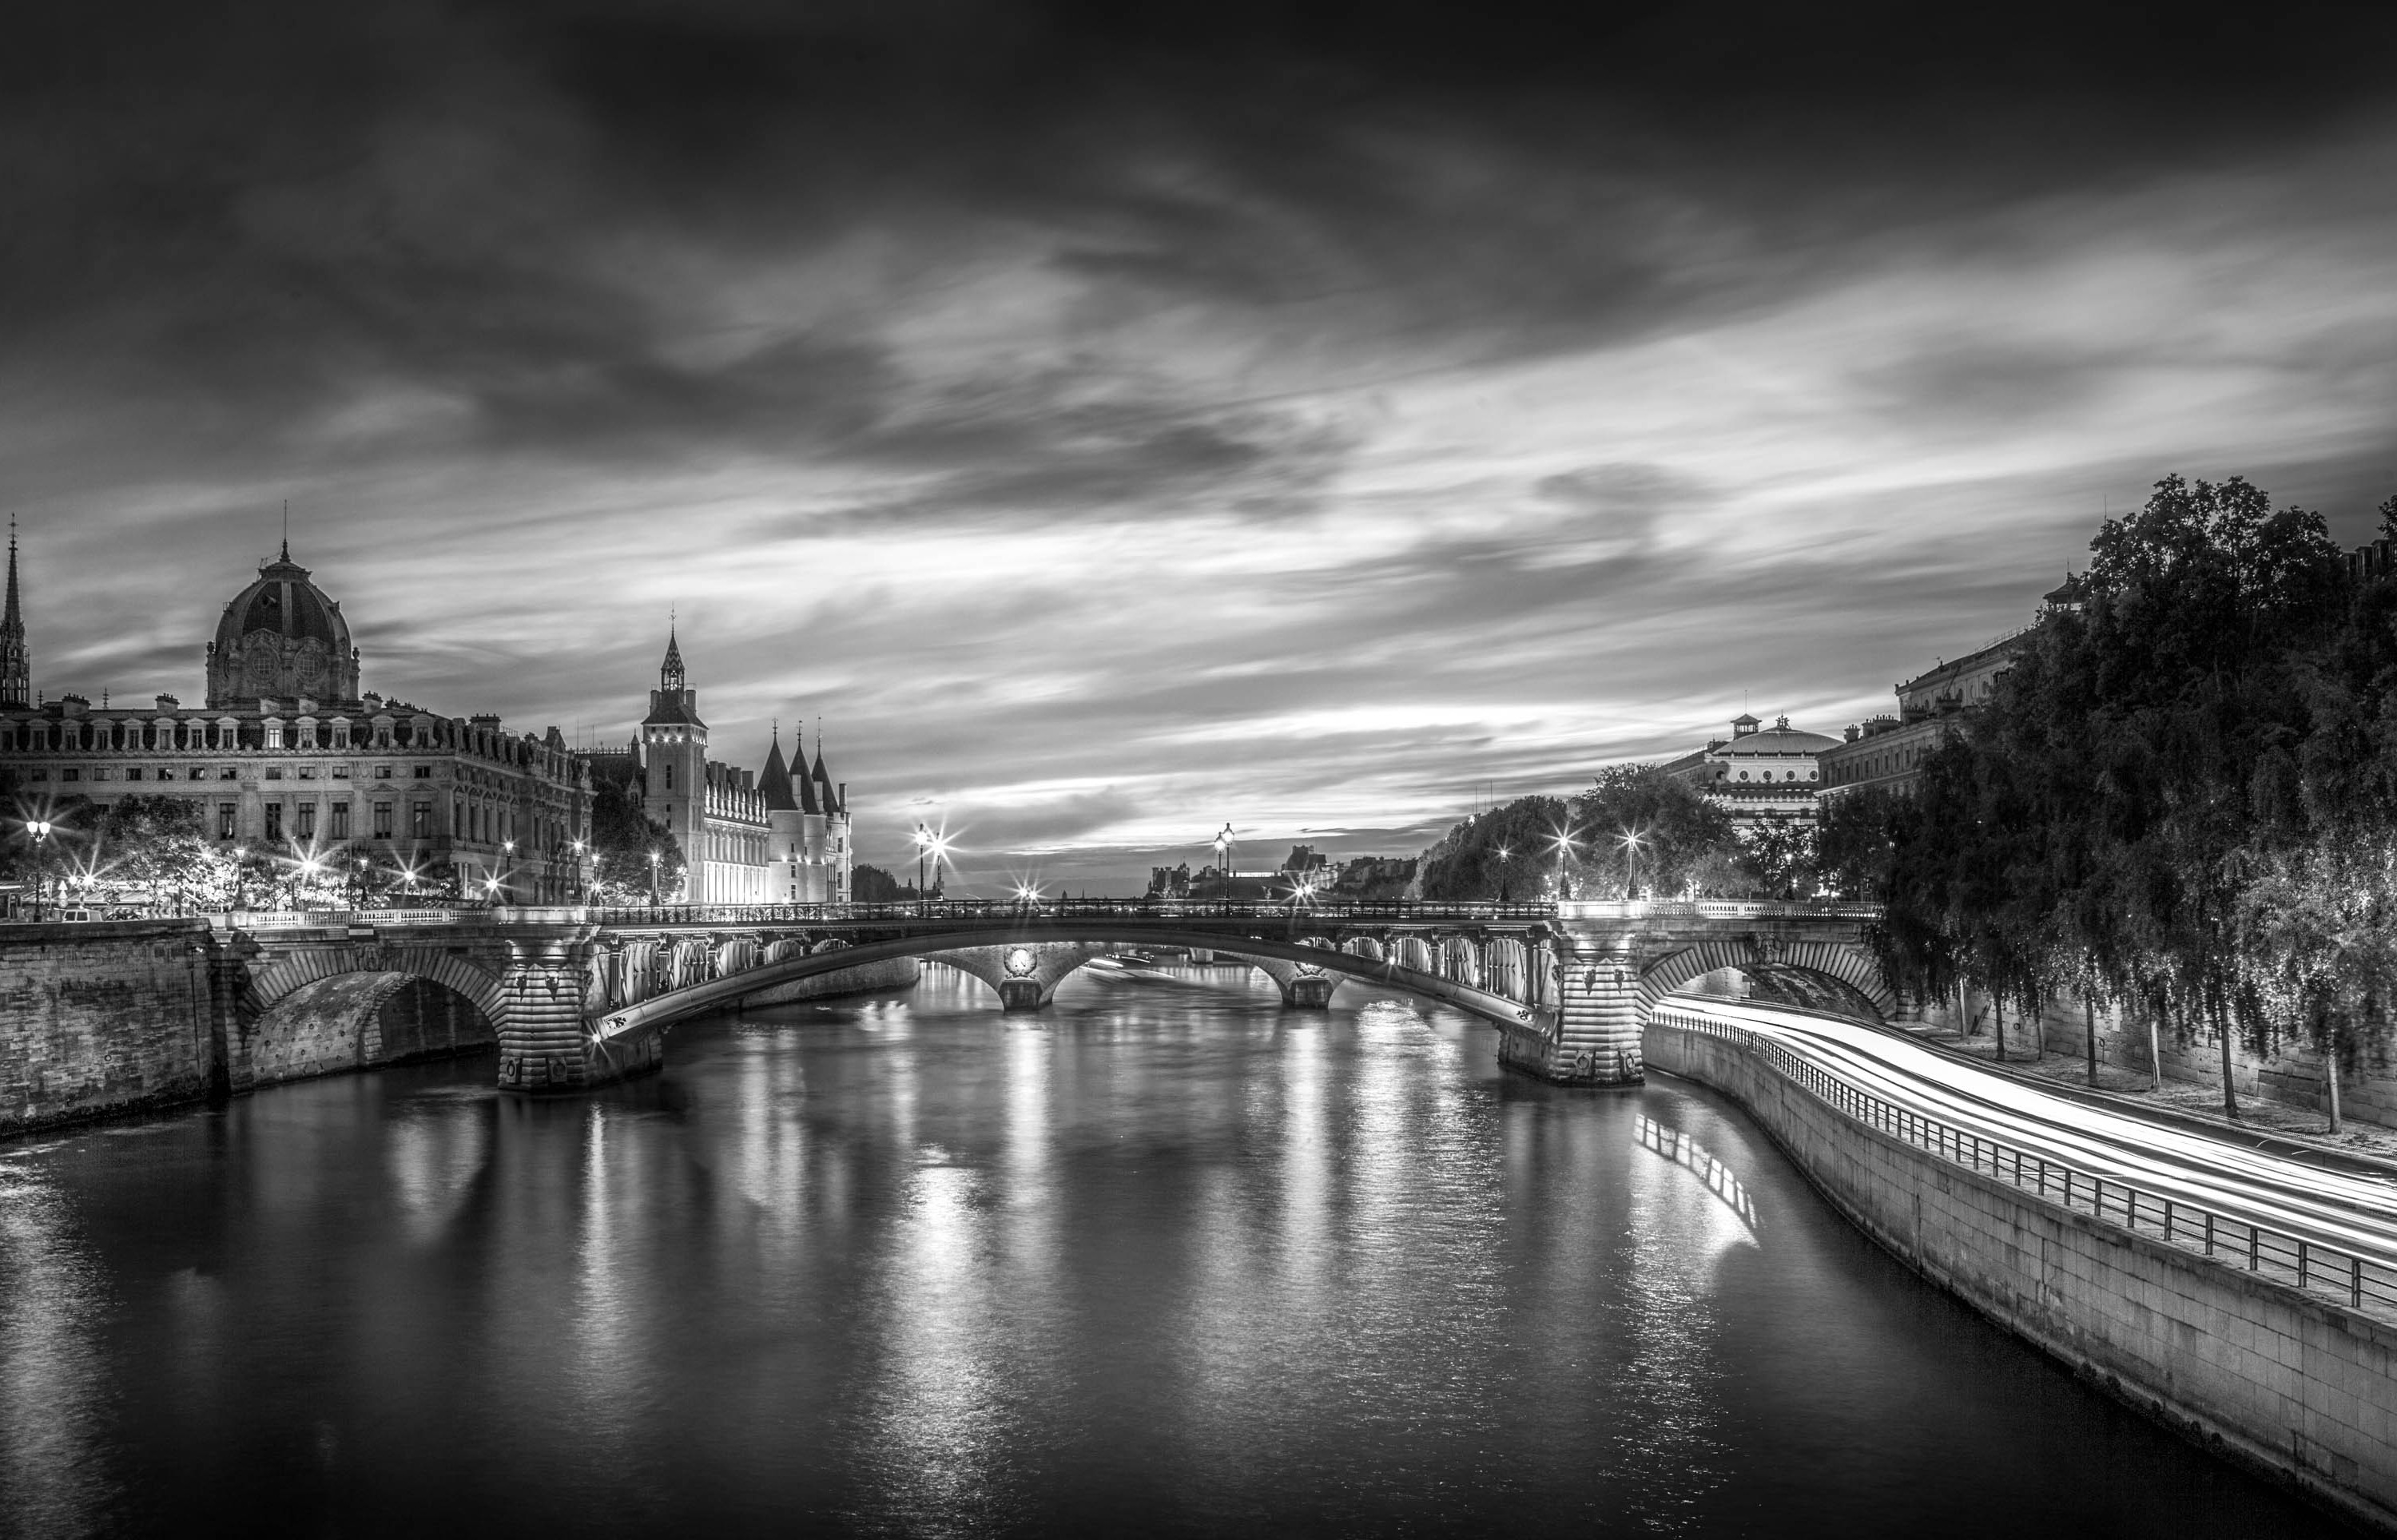 Learn to Shoot and Edit Intense Black & White Cityscapes Like Serge Ramelli